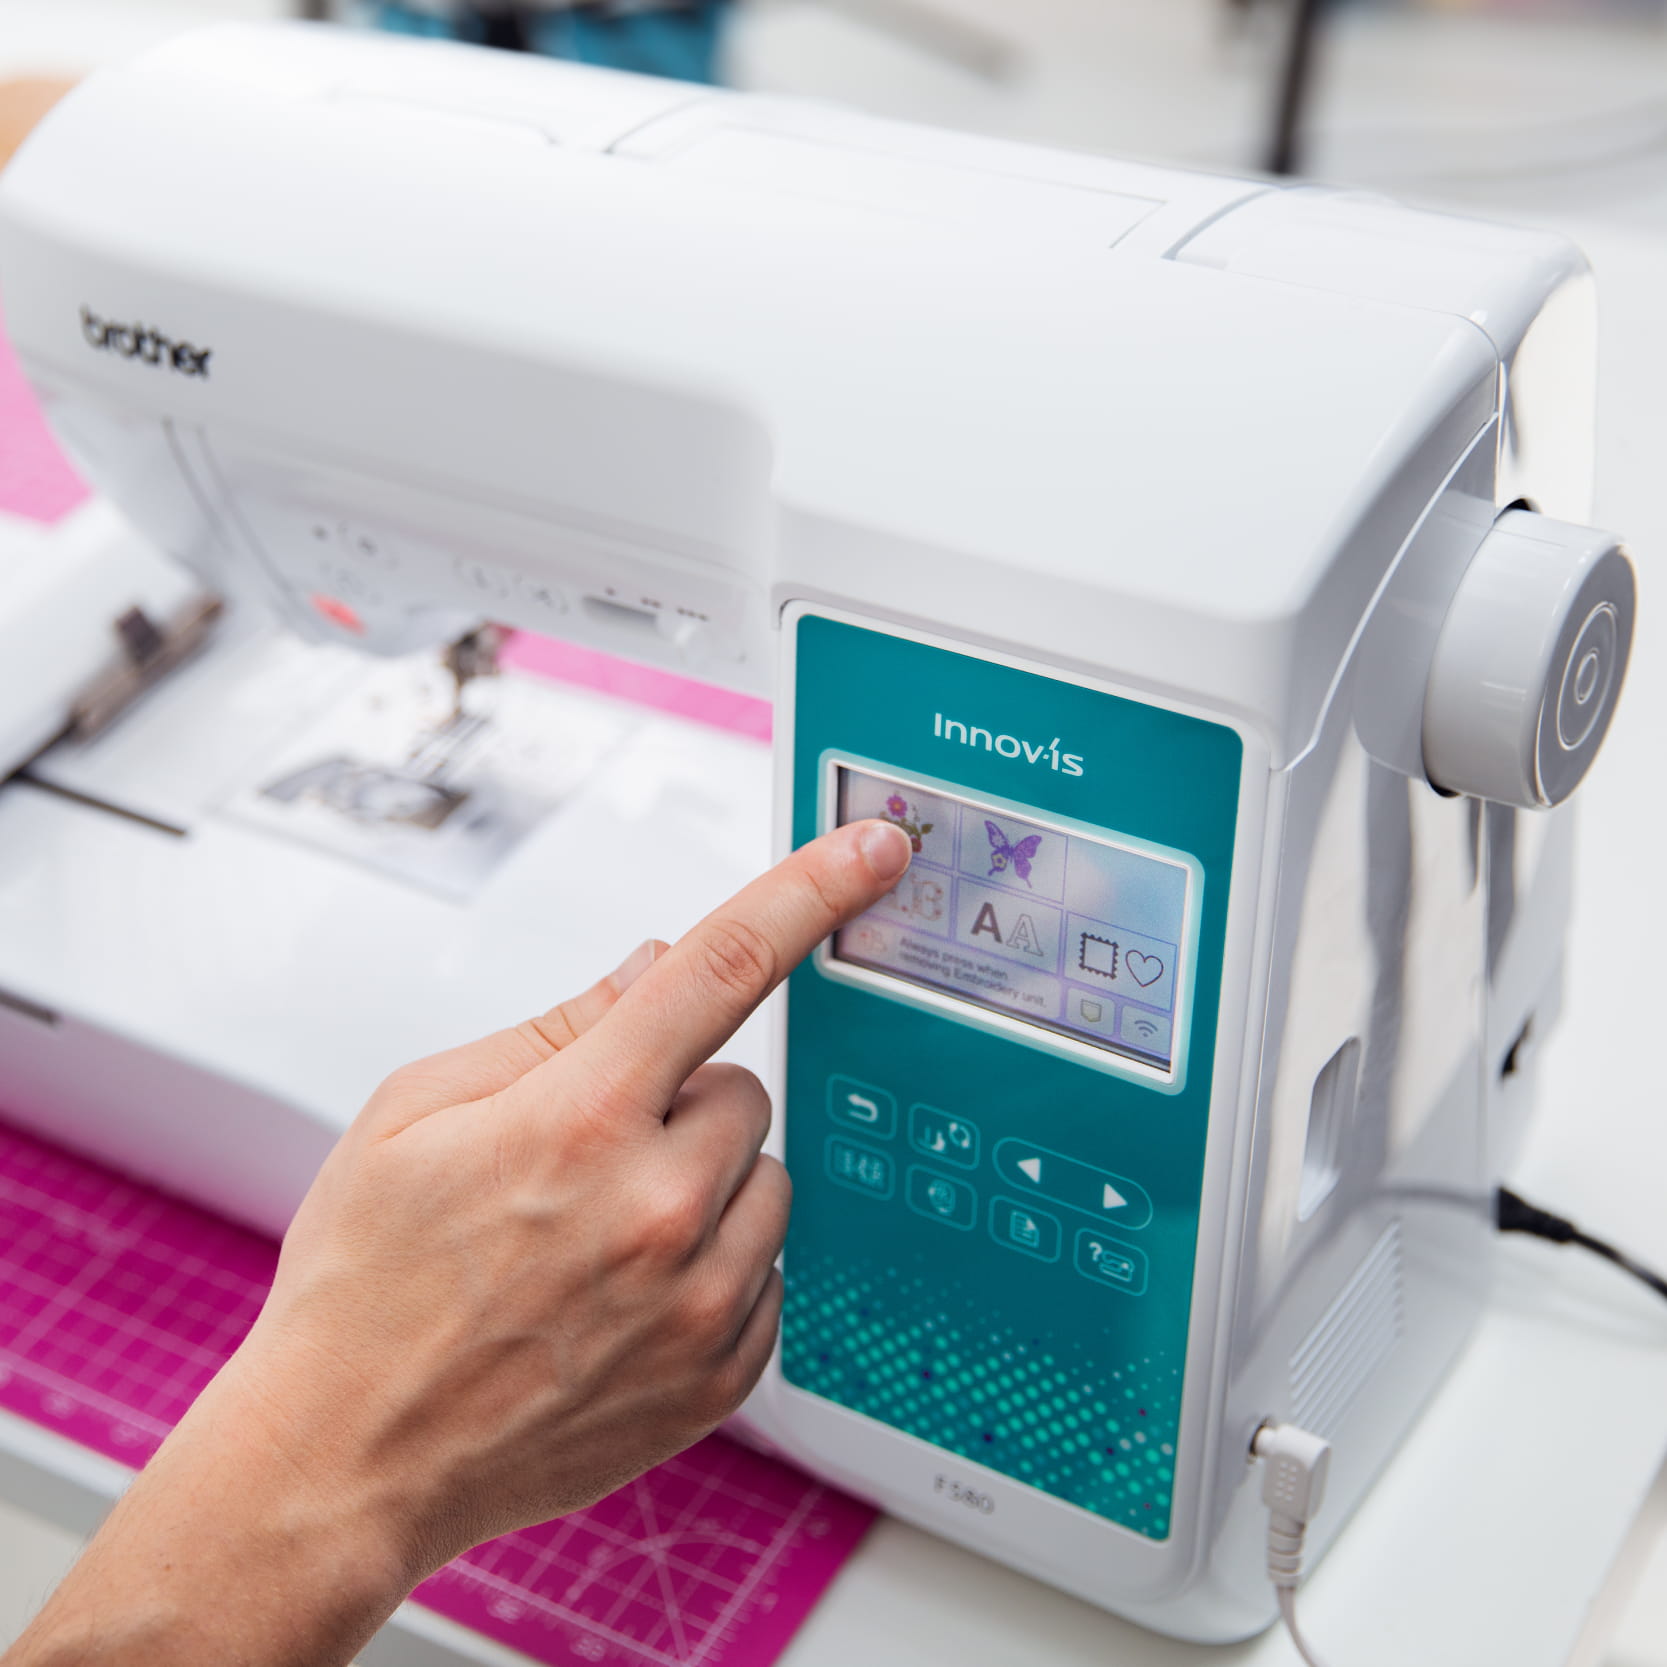 Embroidery Machine Feature - On-screen Editing